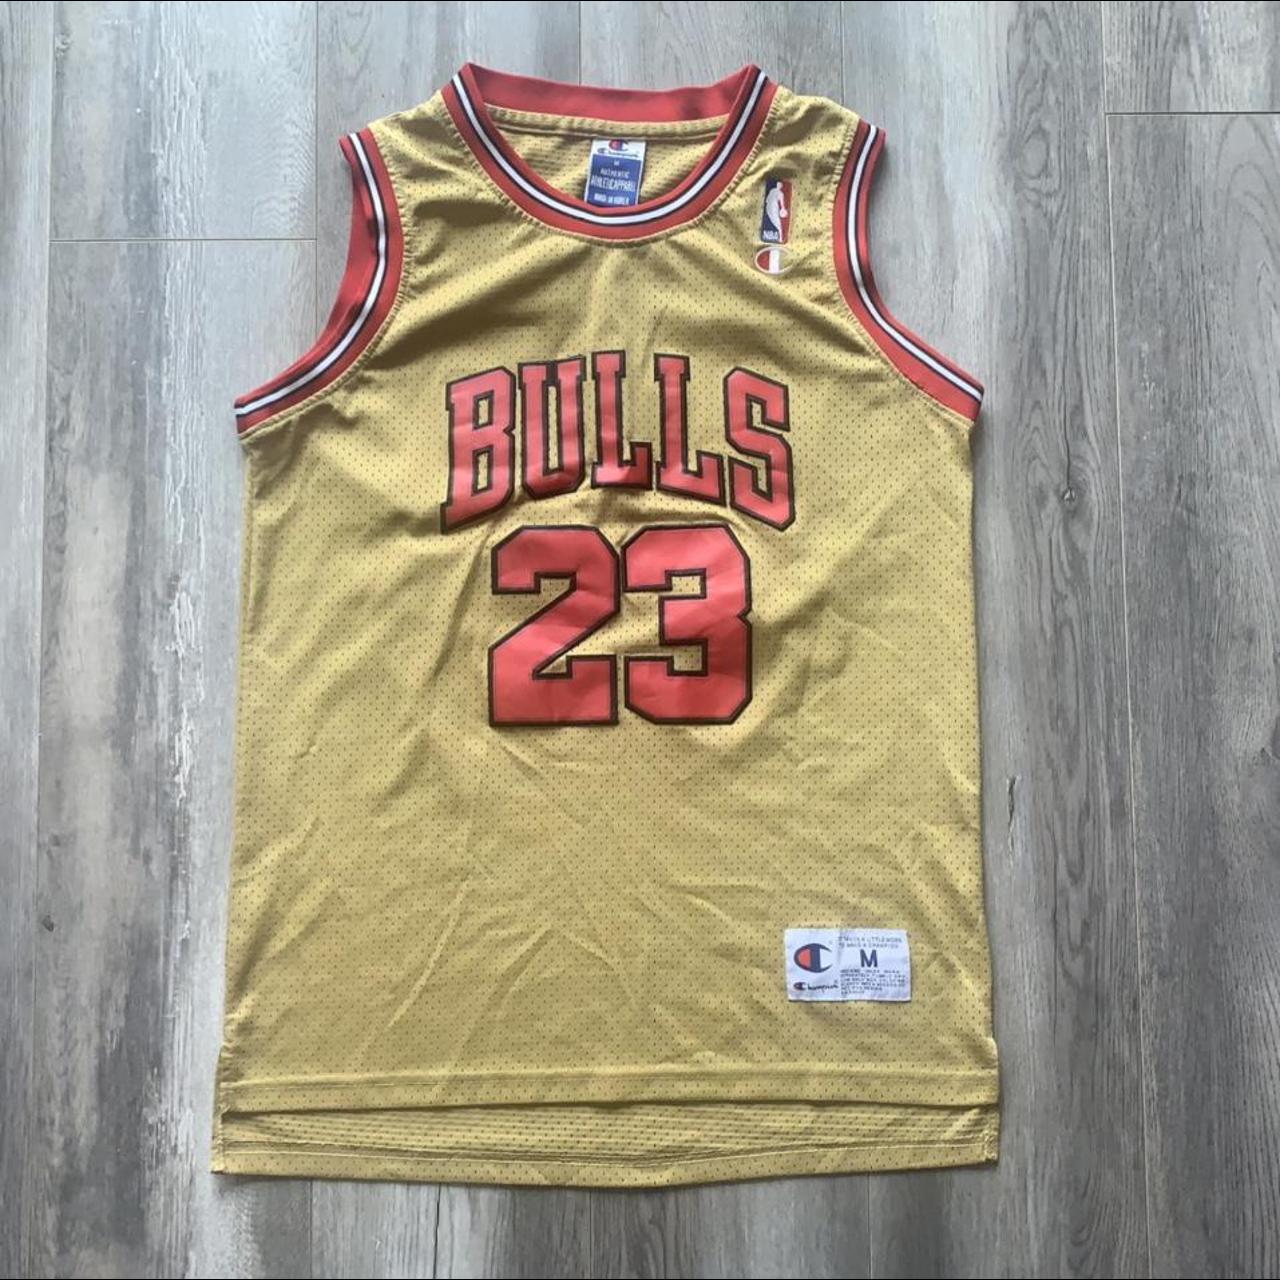 Extremely rare Champions Michael Jordan jersey in - Depop